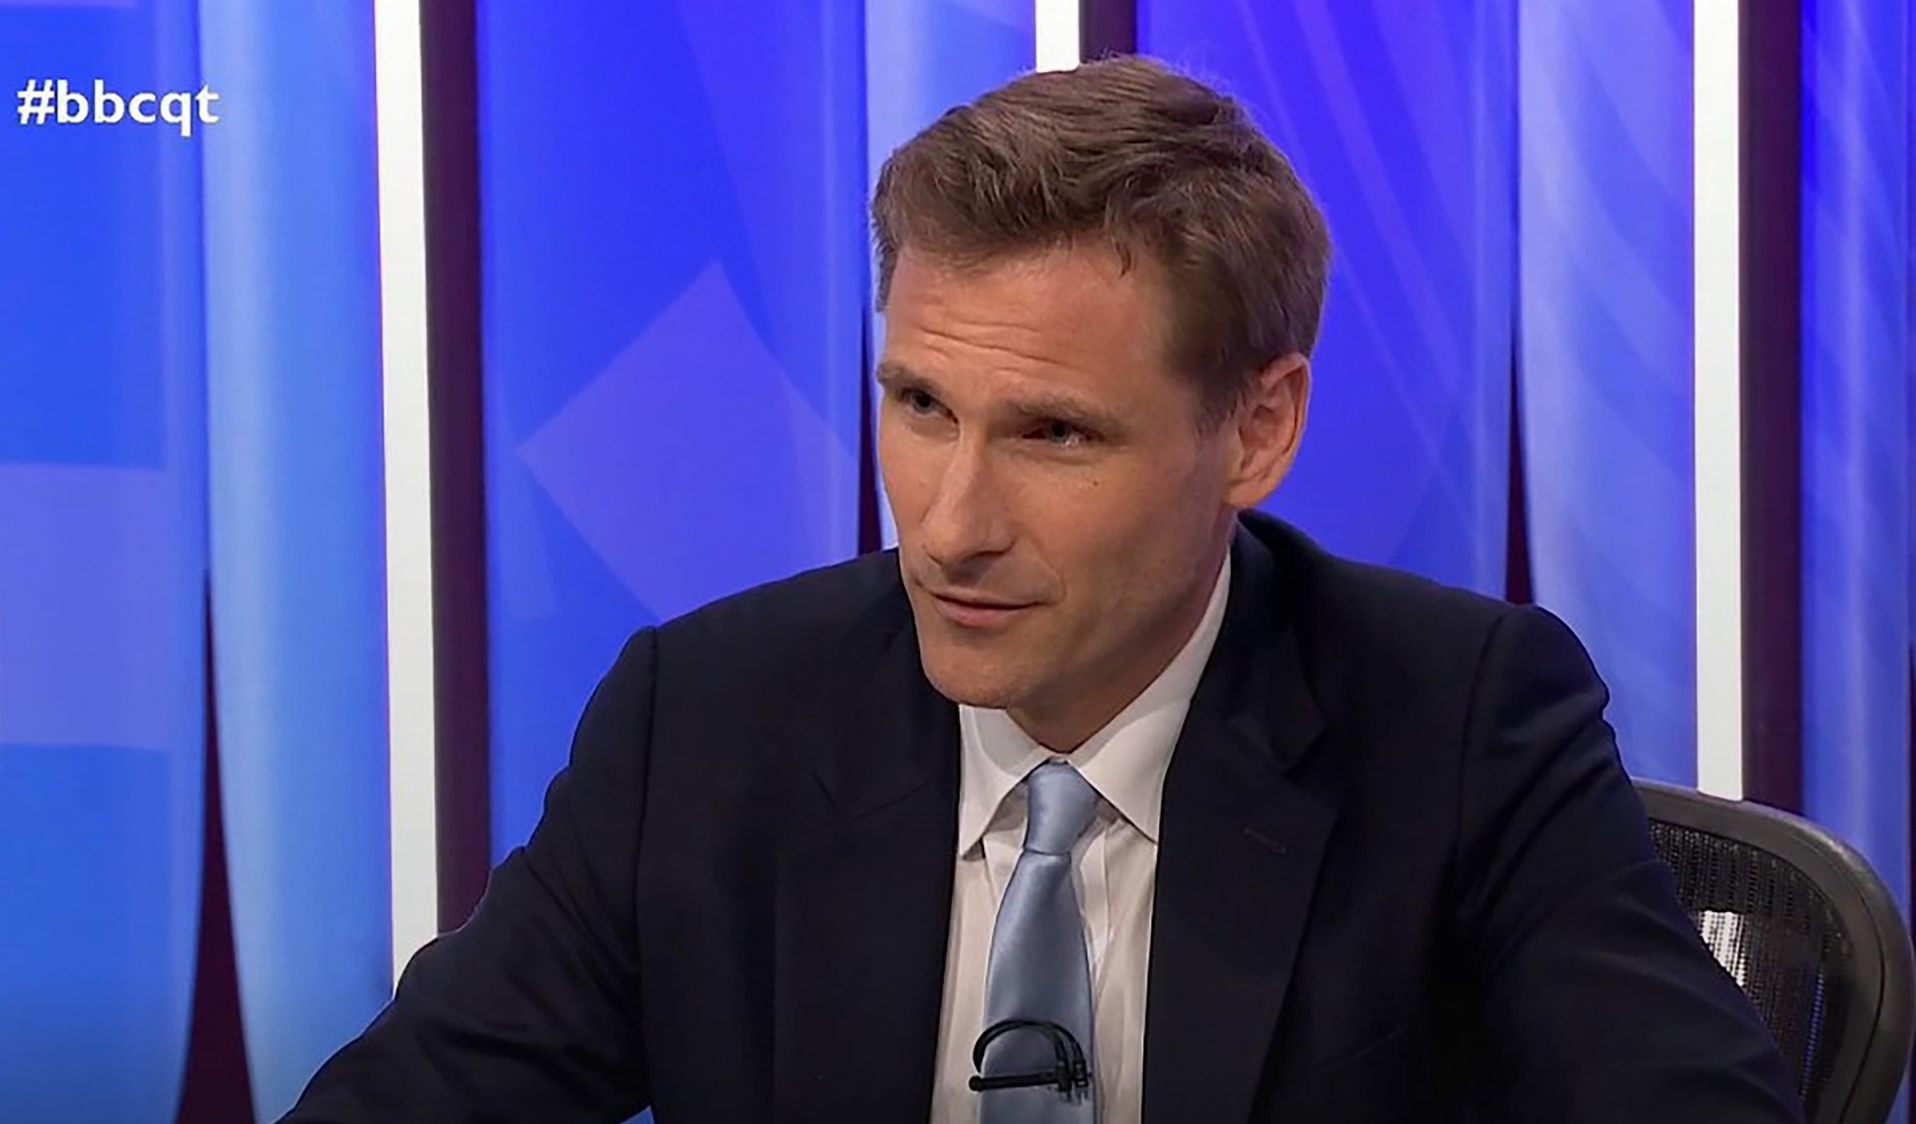 Home Office minister Chris Philp asked whether 'Rwanda is a different country from Congo' on BBC TV’s Question Time